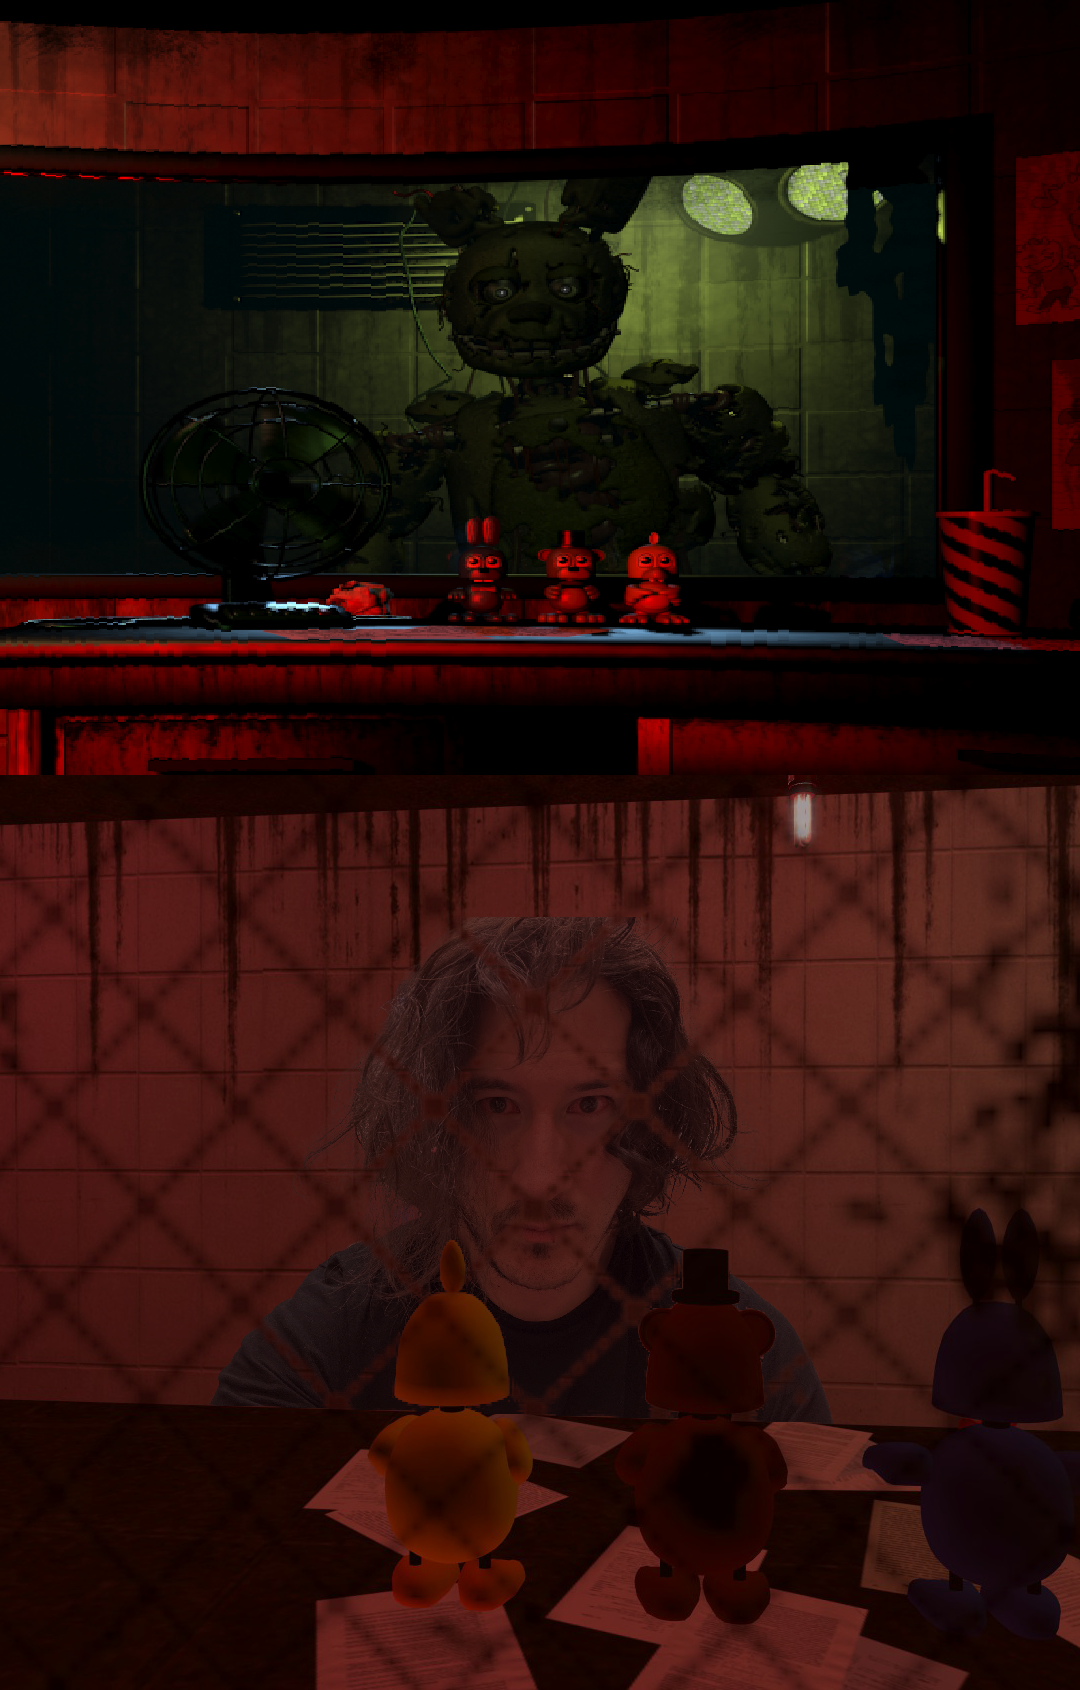 on the top, is springtrap staring through the fnaf 3 window, while the red alarm lights are going off. on the bottom, is markiplier staring back at him from the other side of the window, on the gmod recreation of the fnaf 3 map